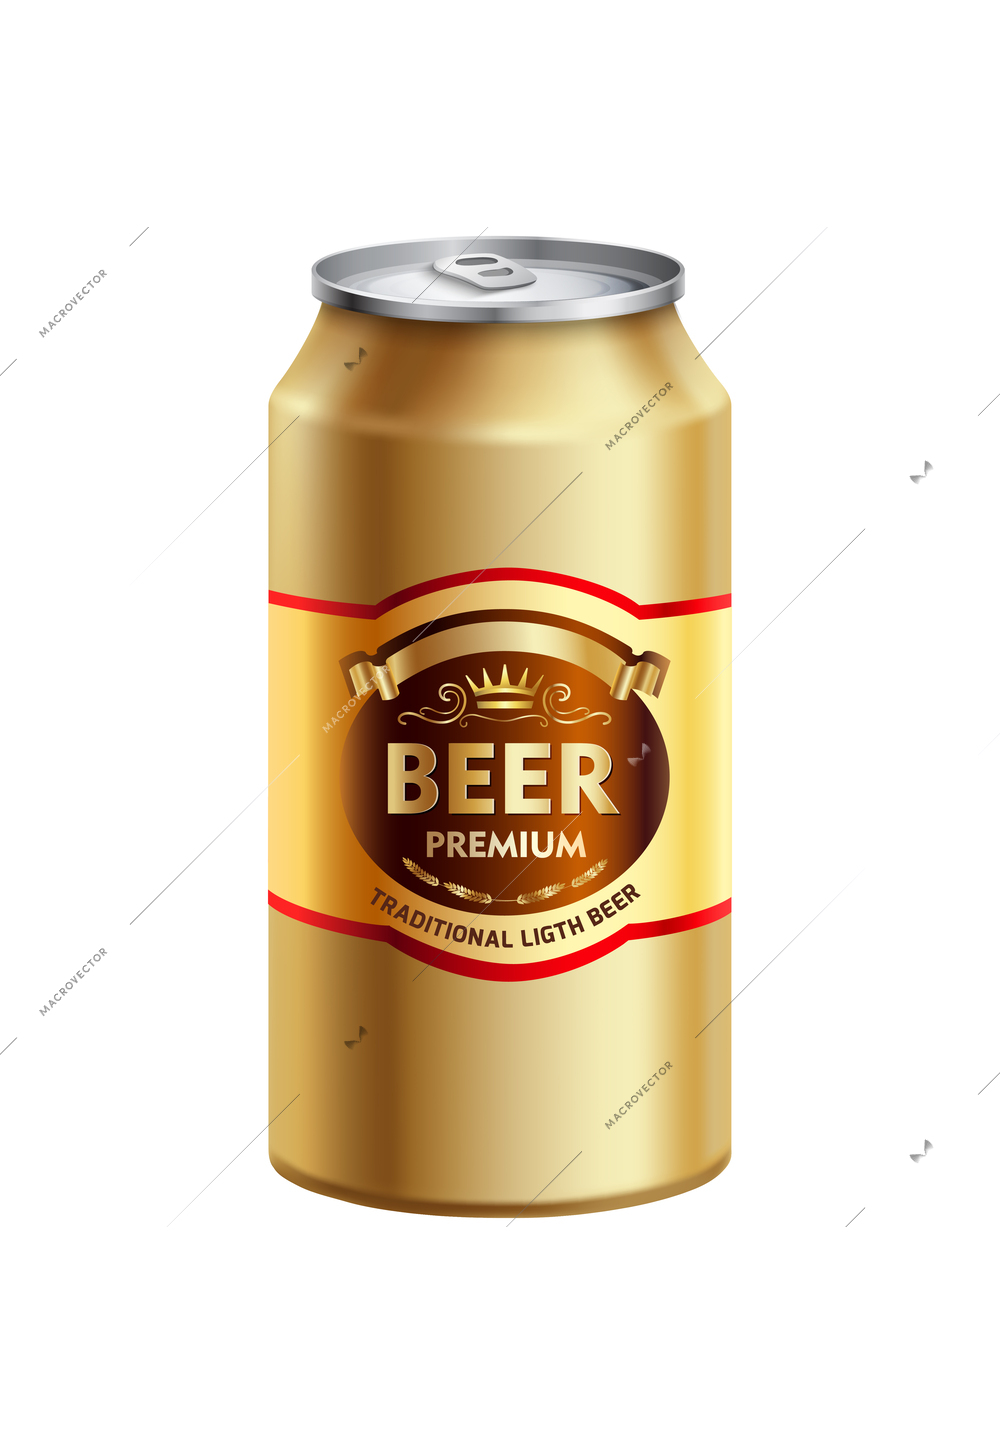 Realistic premium beer packaging aluminium can on white background vector illustration